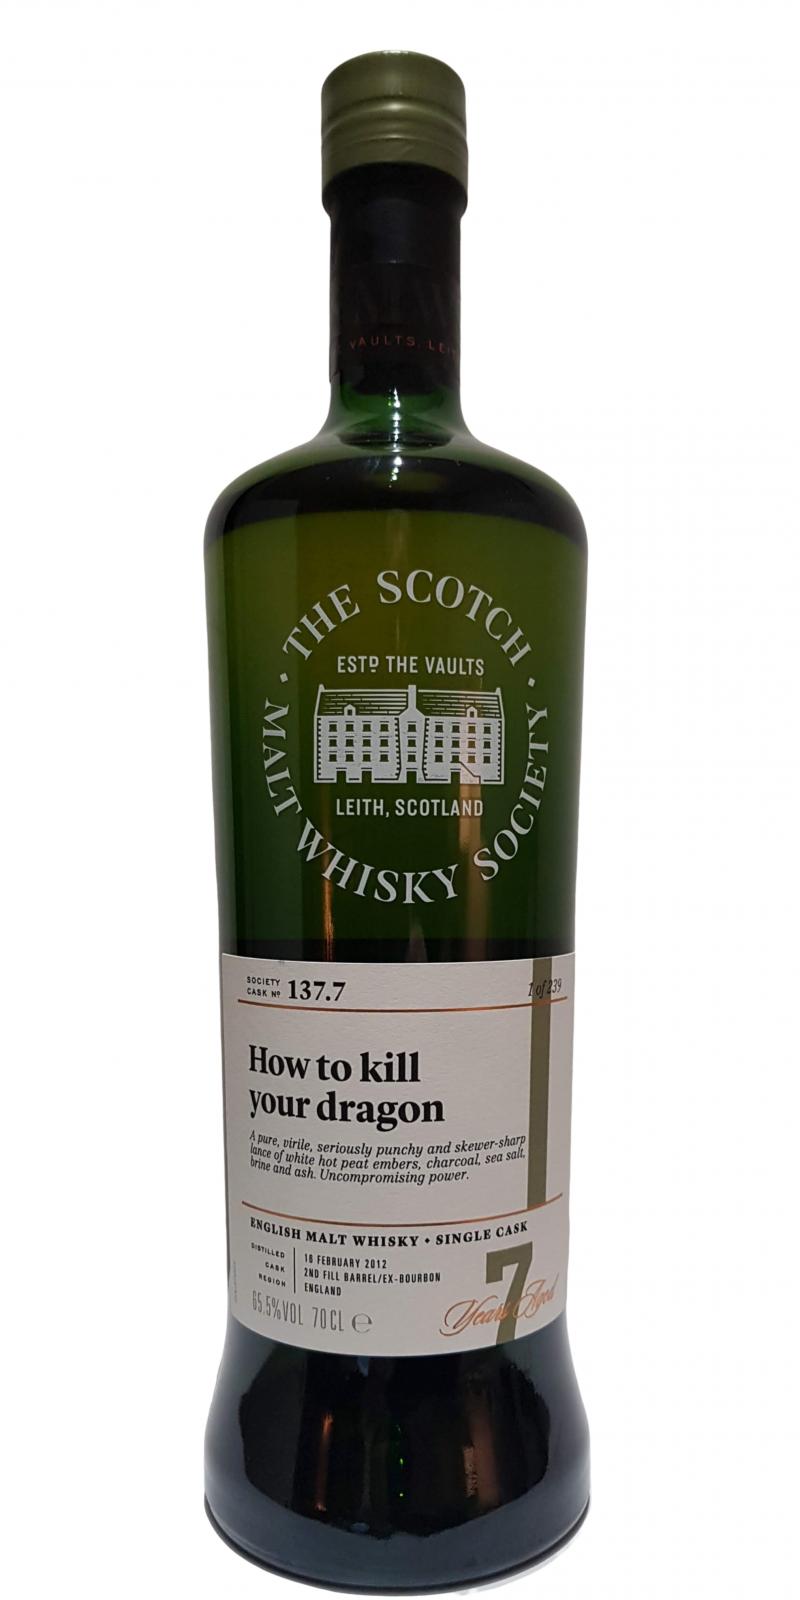 The English Whisky 2012 SMWS 137.7